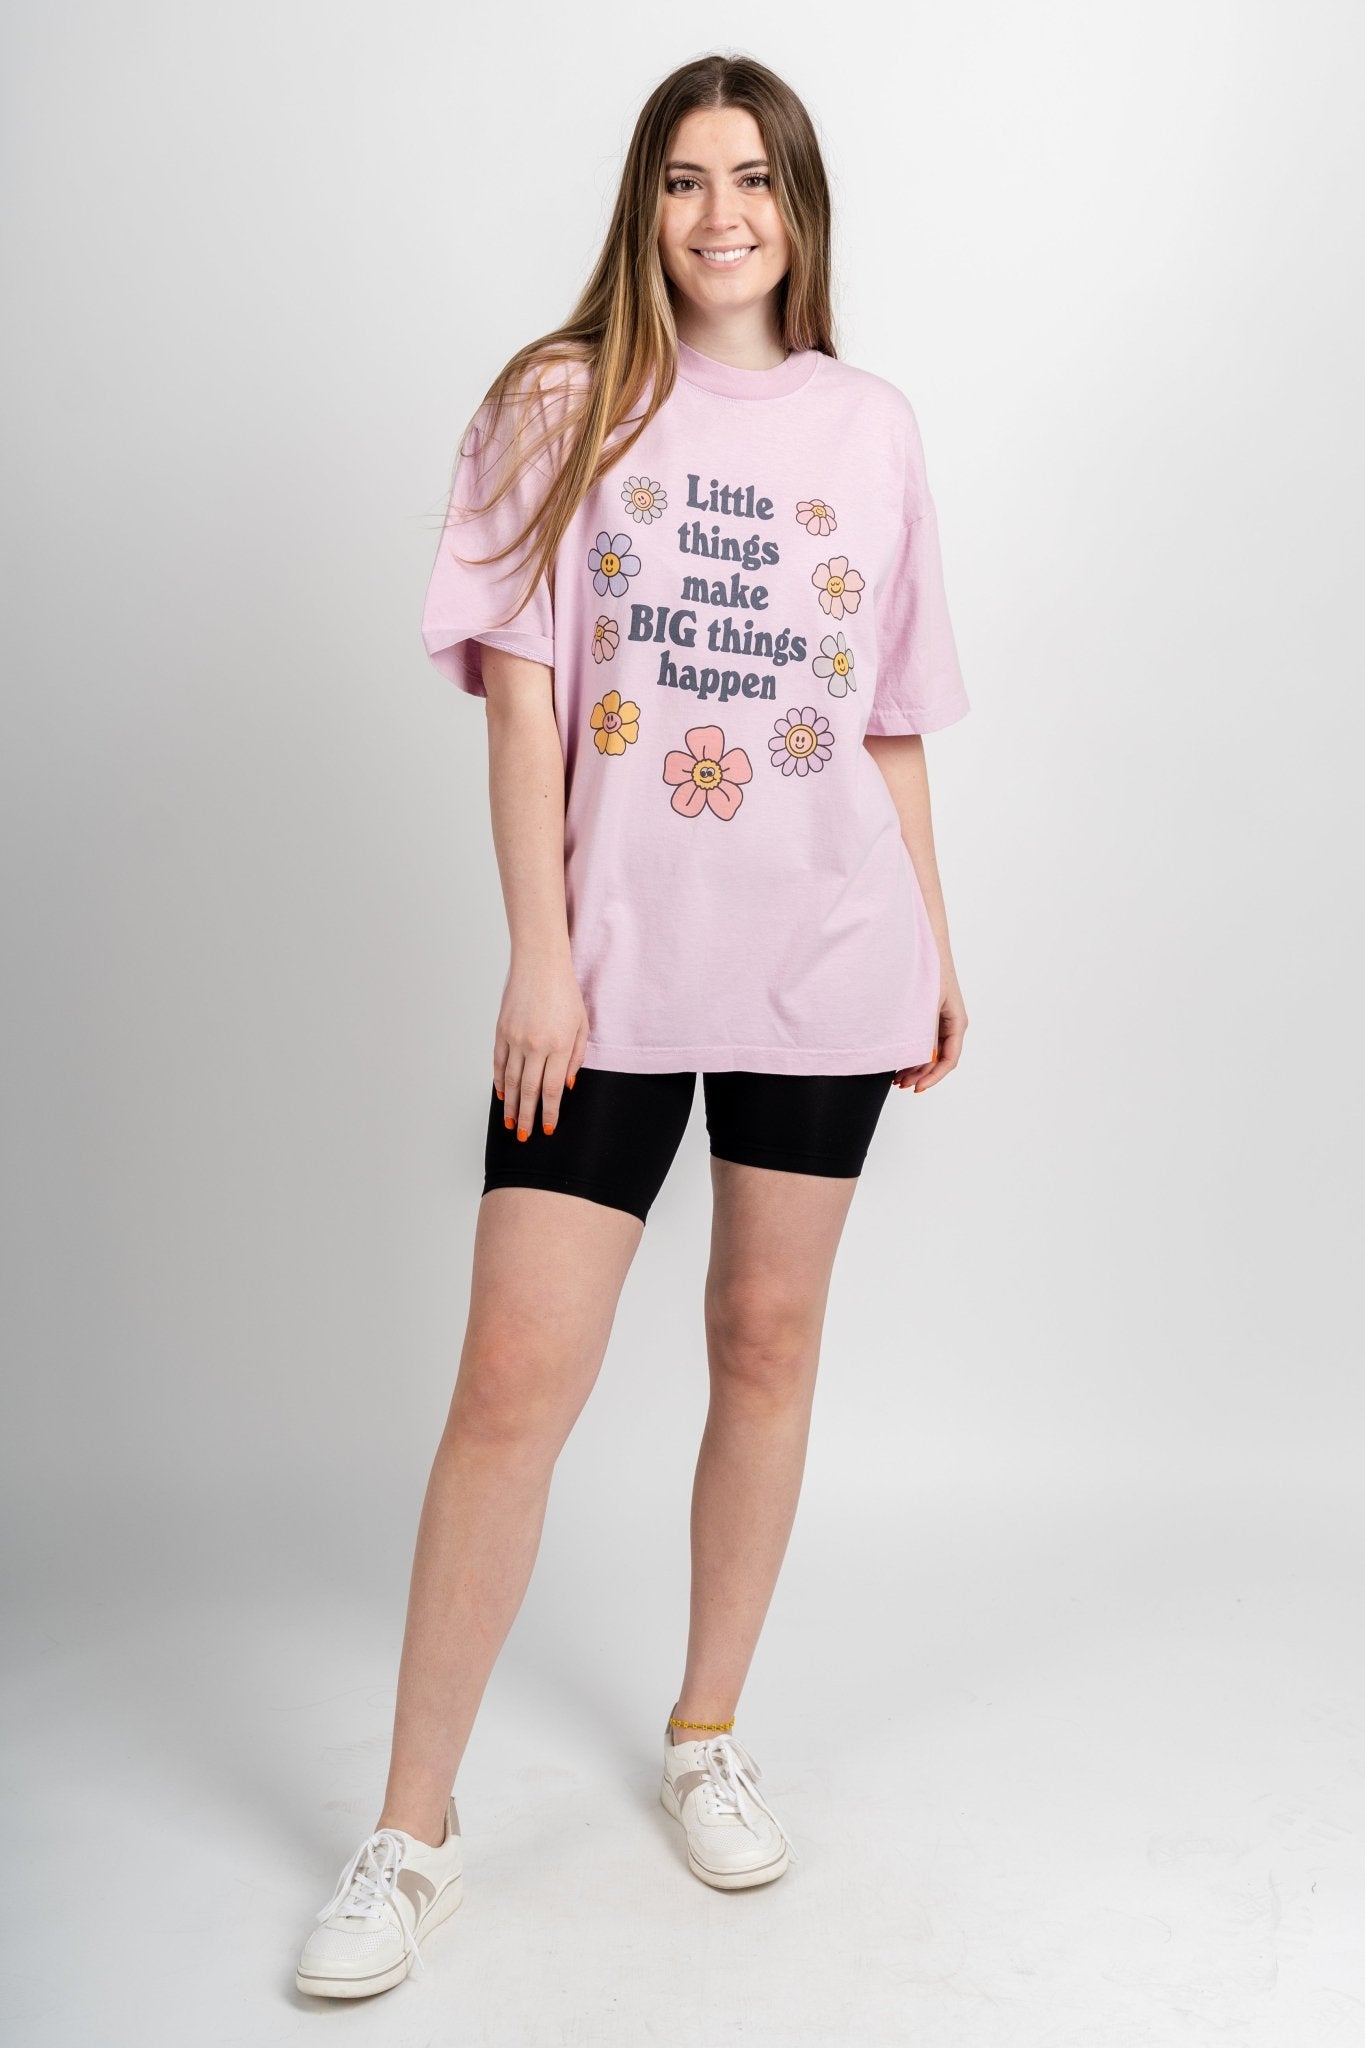 Little things make big things happen oversized graphic tee pink